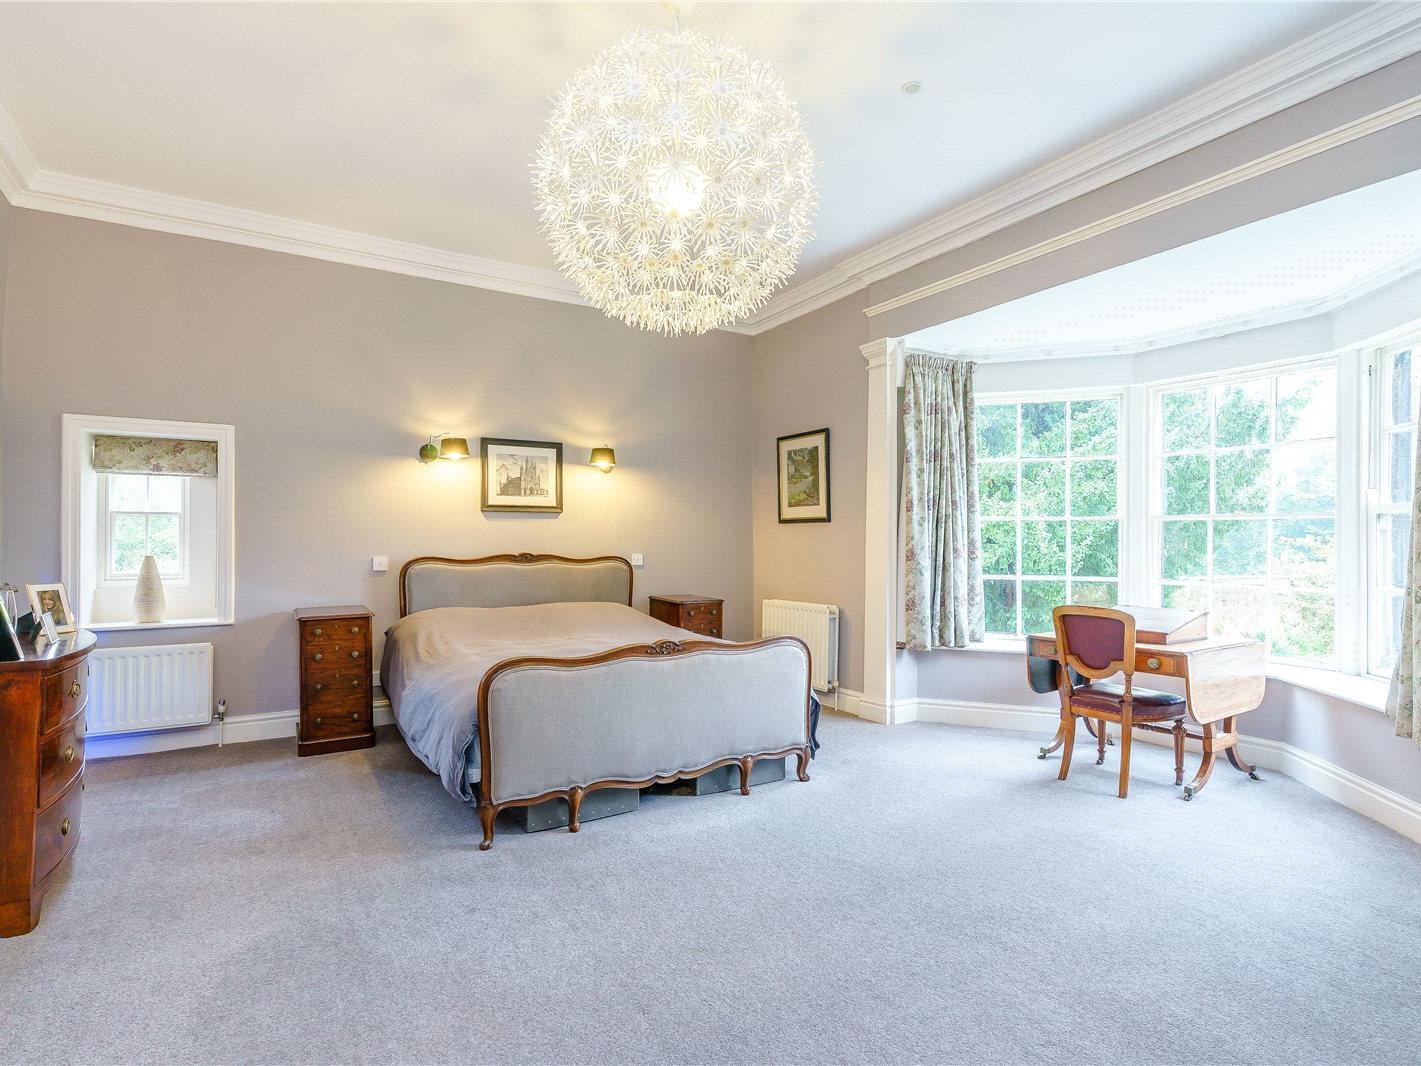 The large master bedroom has an  fireplace, large bay window and dressing room fitted with a walk in wardrobe.